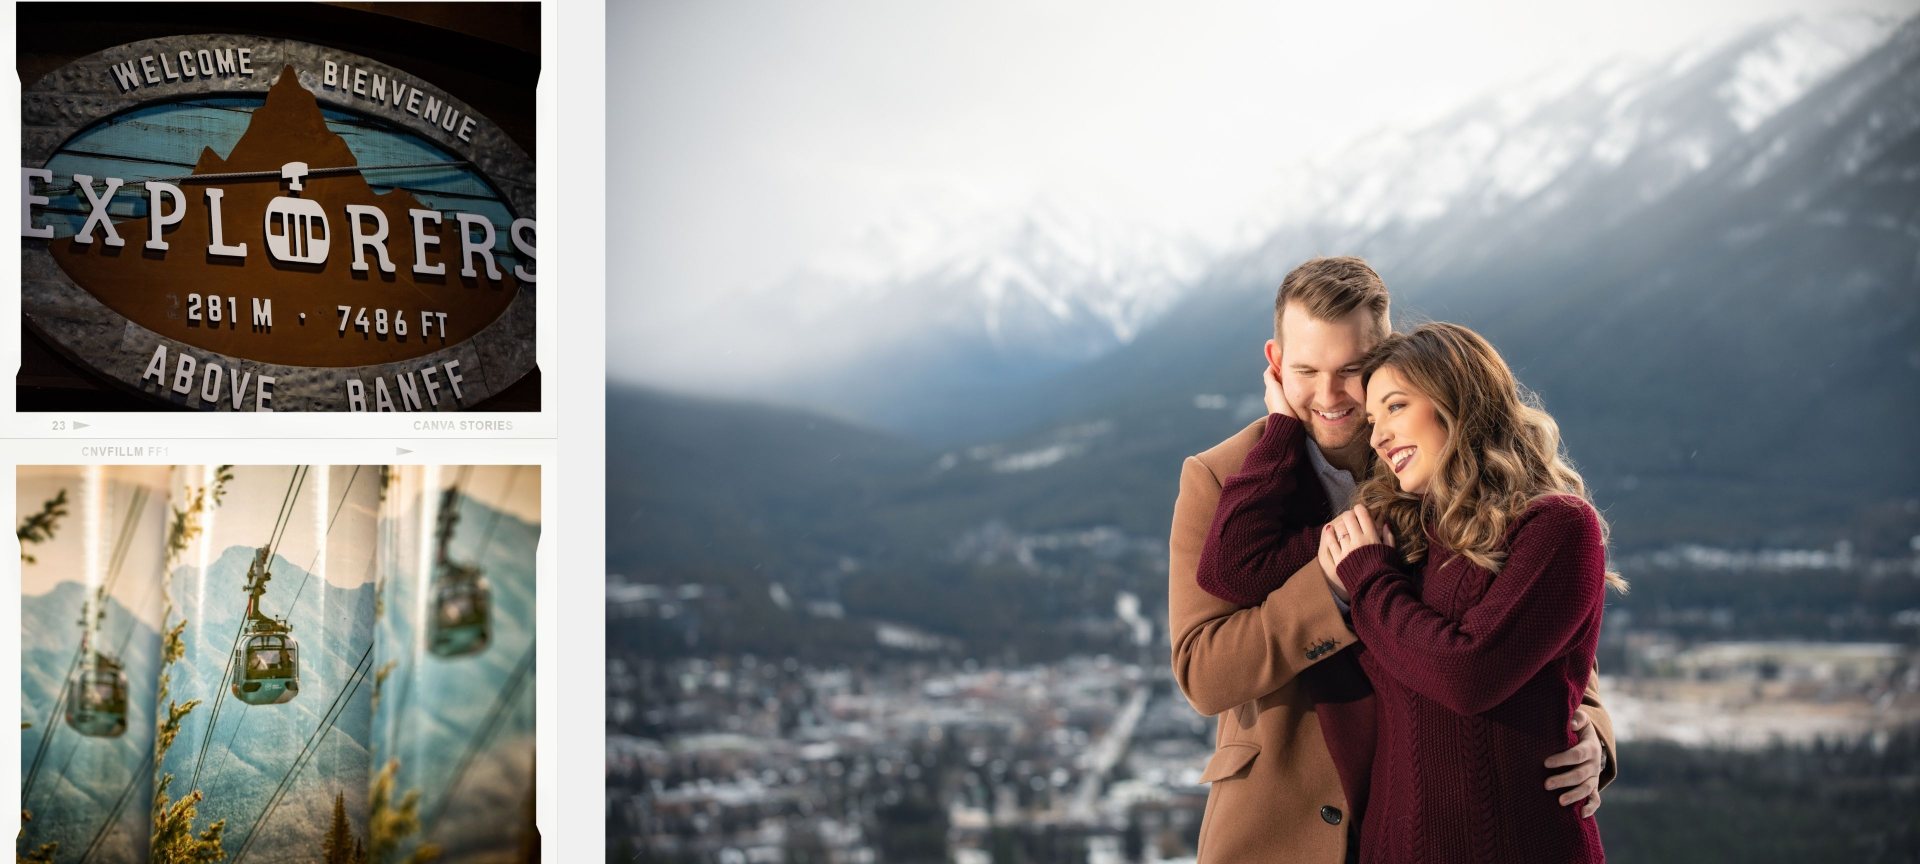 Banff proposal with mountain views & gondola-ride - recently engaged couple embracing themselves at their banff proposal